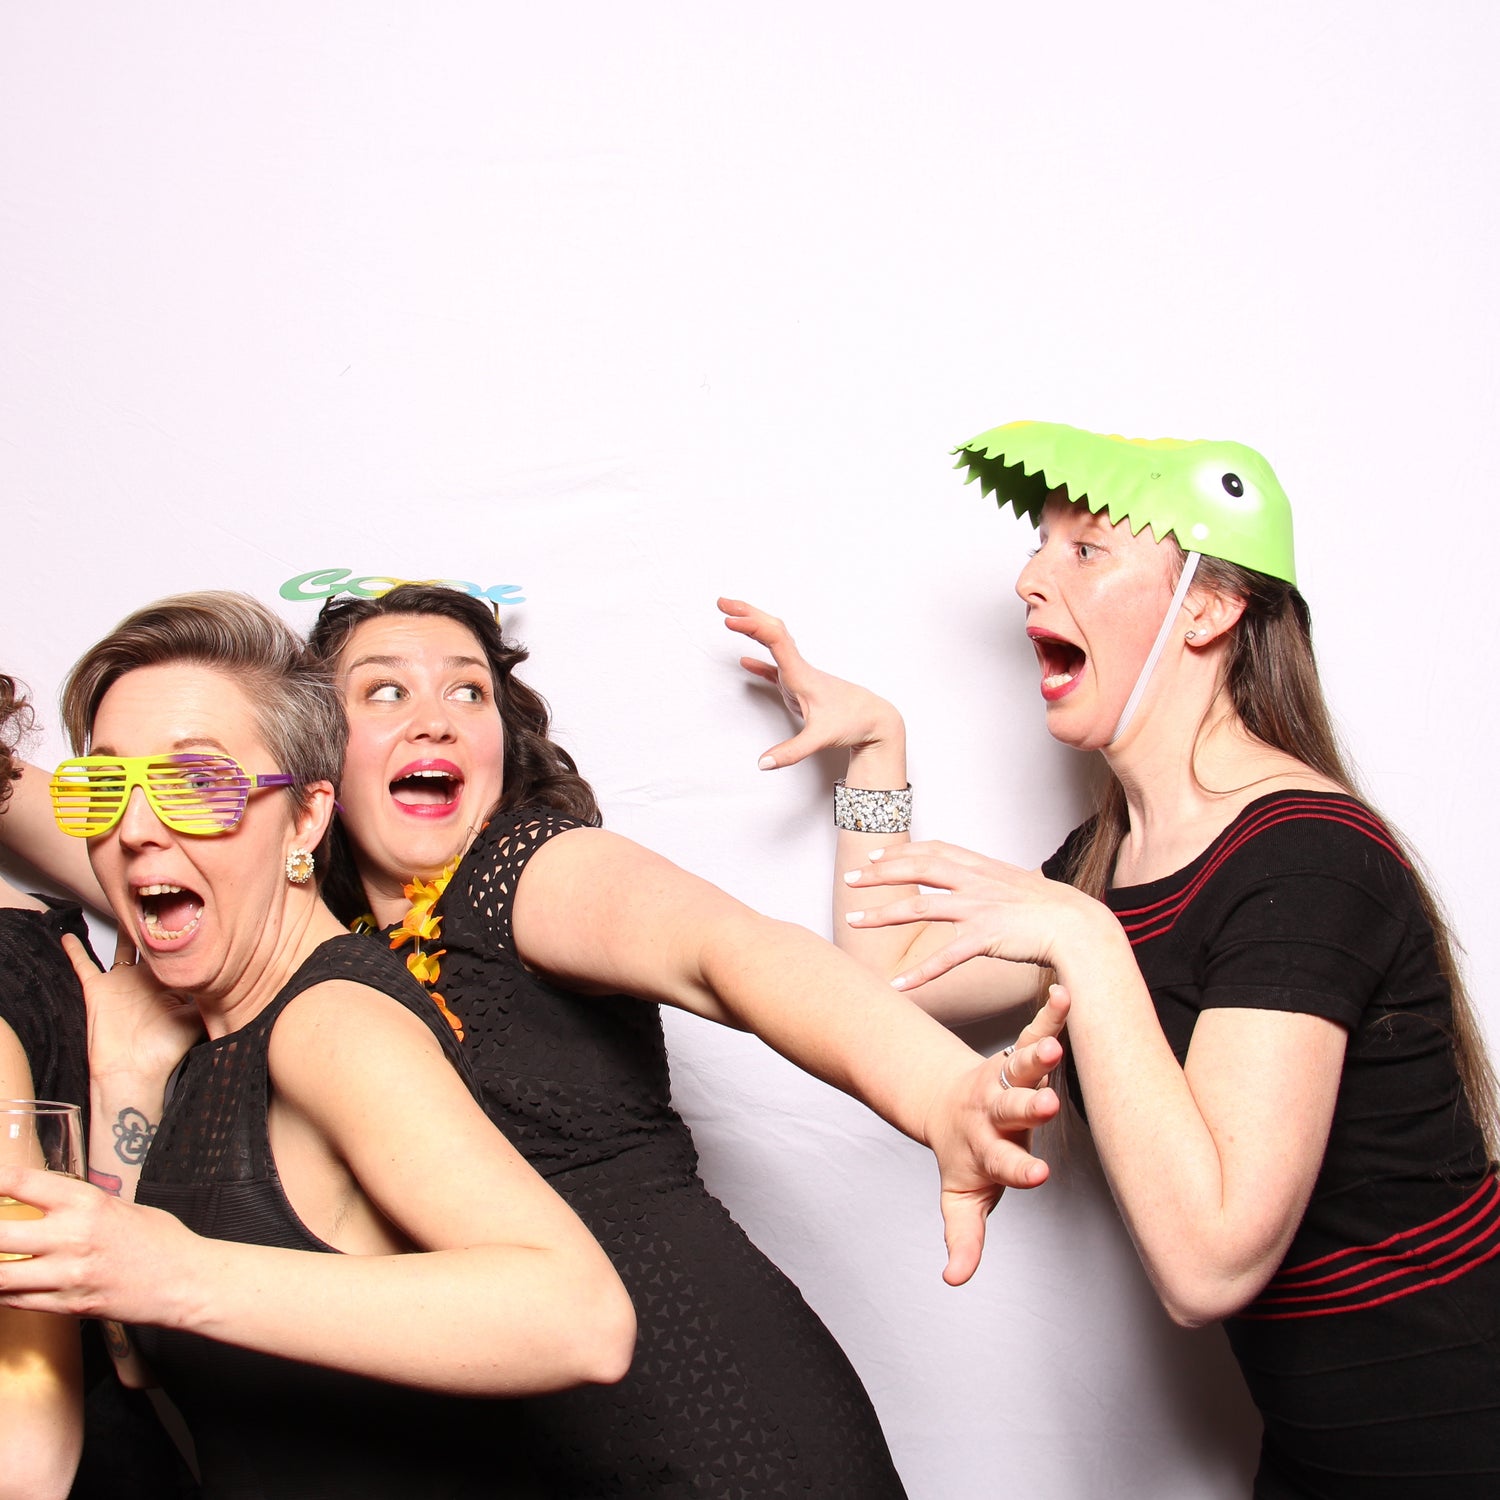 Woman in a T-Rex prop hat chases her friends in a photo booth picture